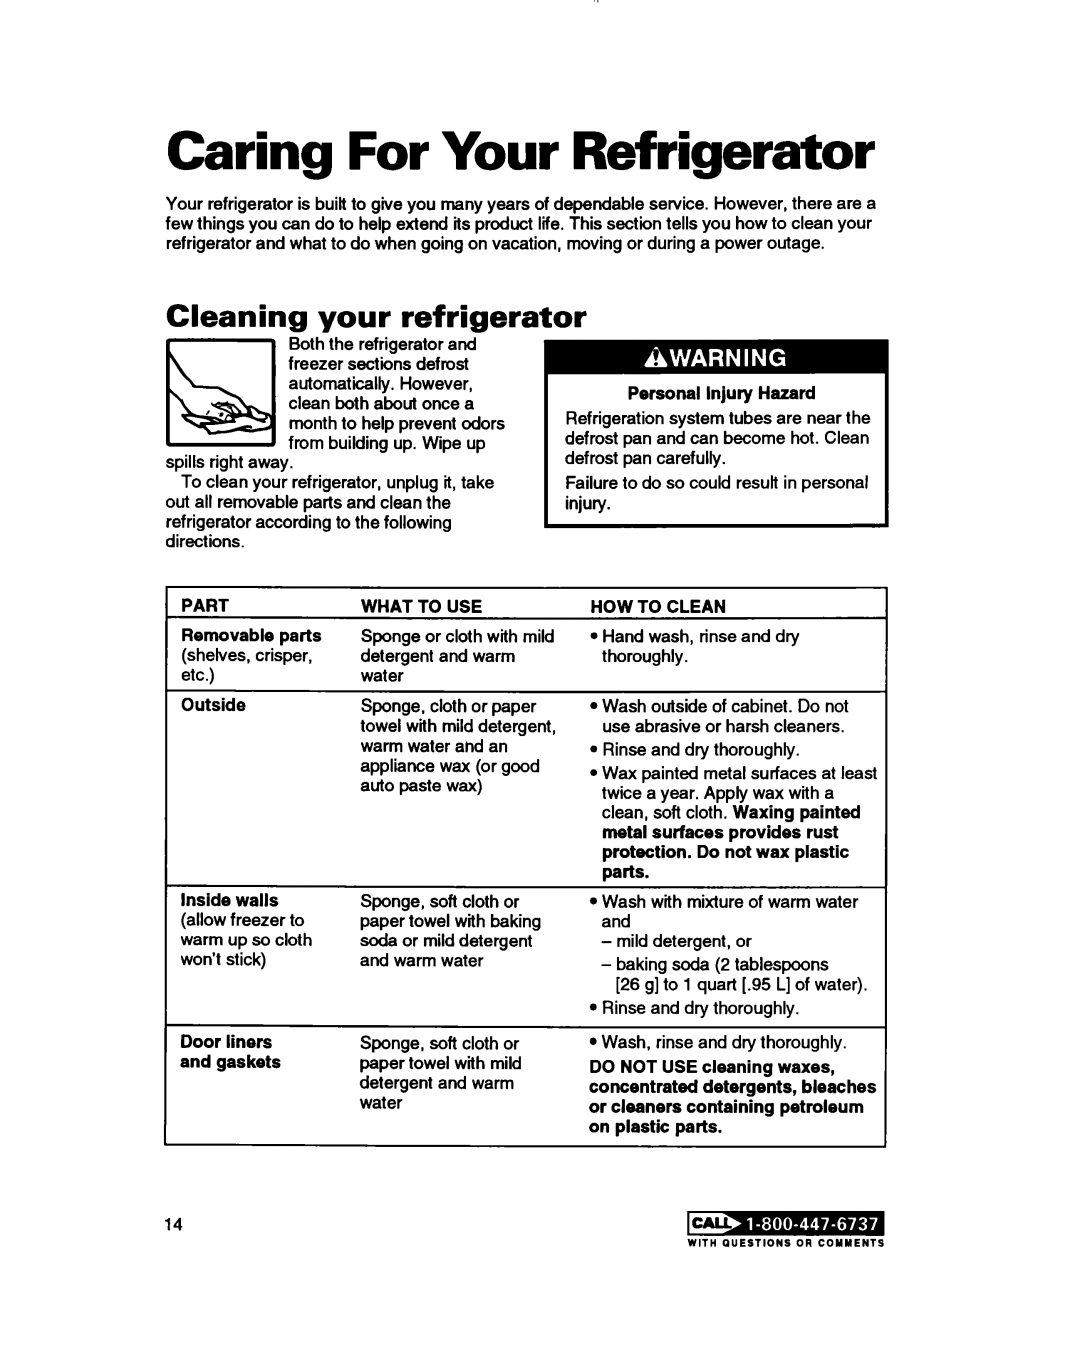 Whirlpool RT14ZK Caring For Your Refrigerator, liiiil, your refrigerator, Personal injury Hazard, Part, What To Use, Door 